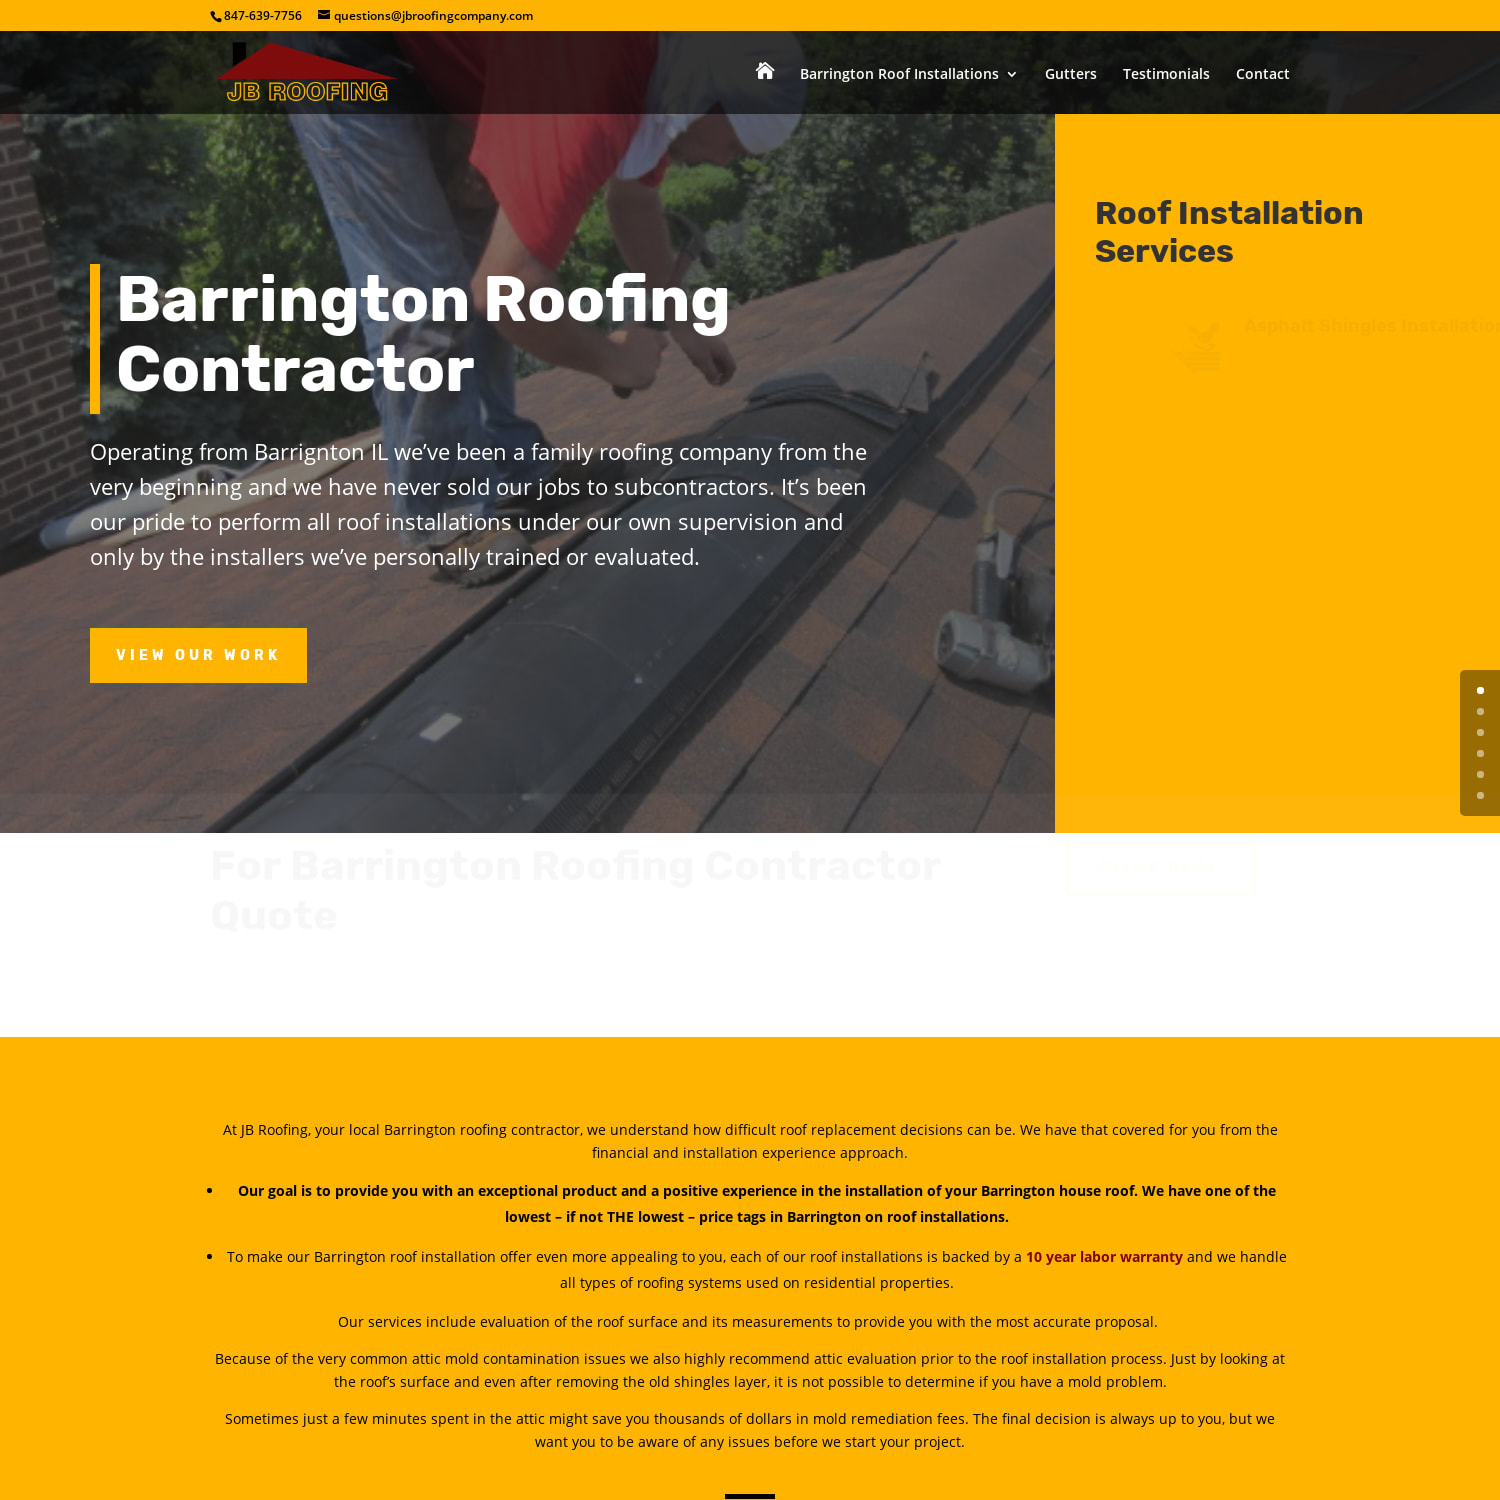 Barrington Roofing Contractor - Residential Roof Systems Installer